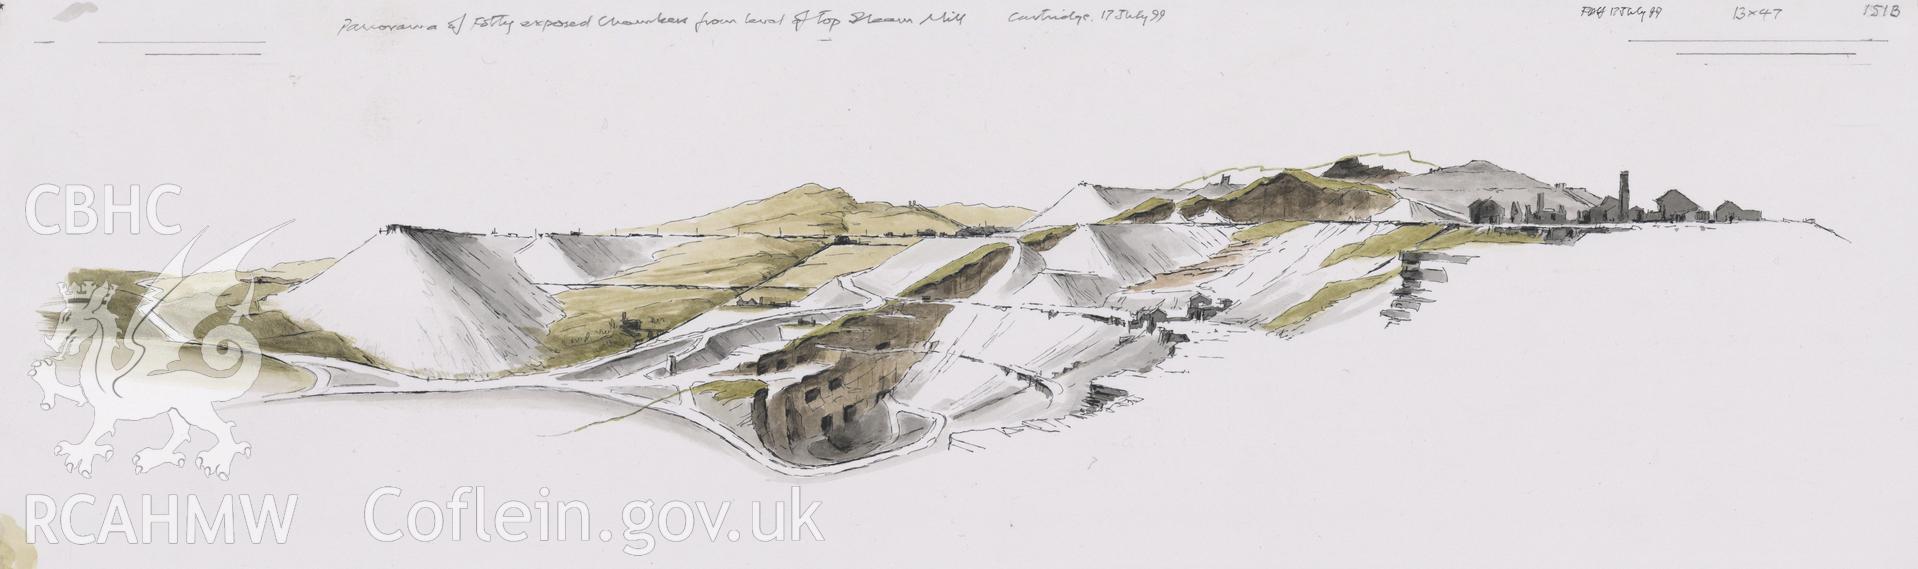 Exposed Chambers in Context of Landscape - Foty & Bowydd Quarry: finished (ink and watercolour) drawing.